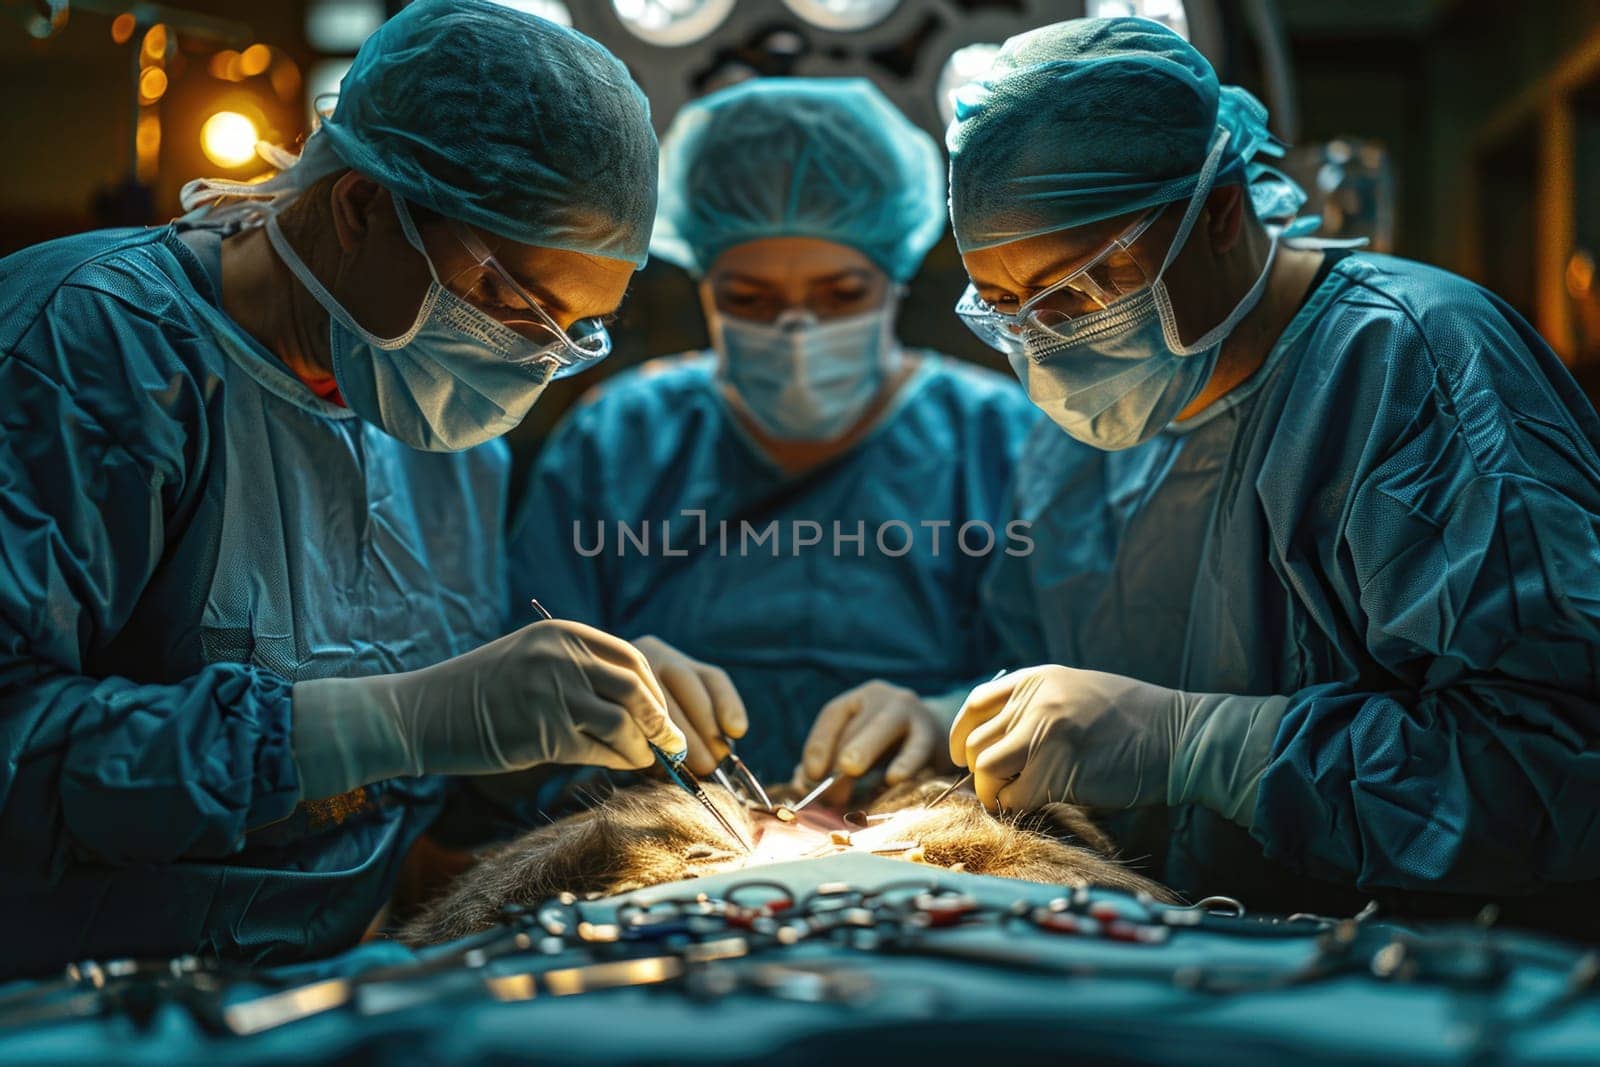 A team of doctors performs surgery on a patient in a veterinary operating room